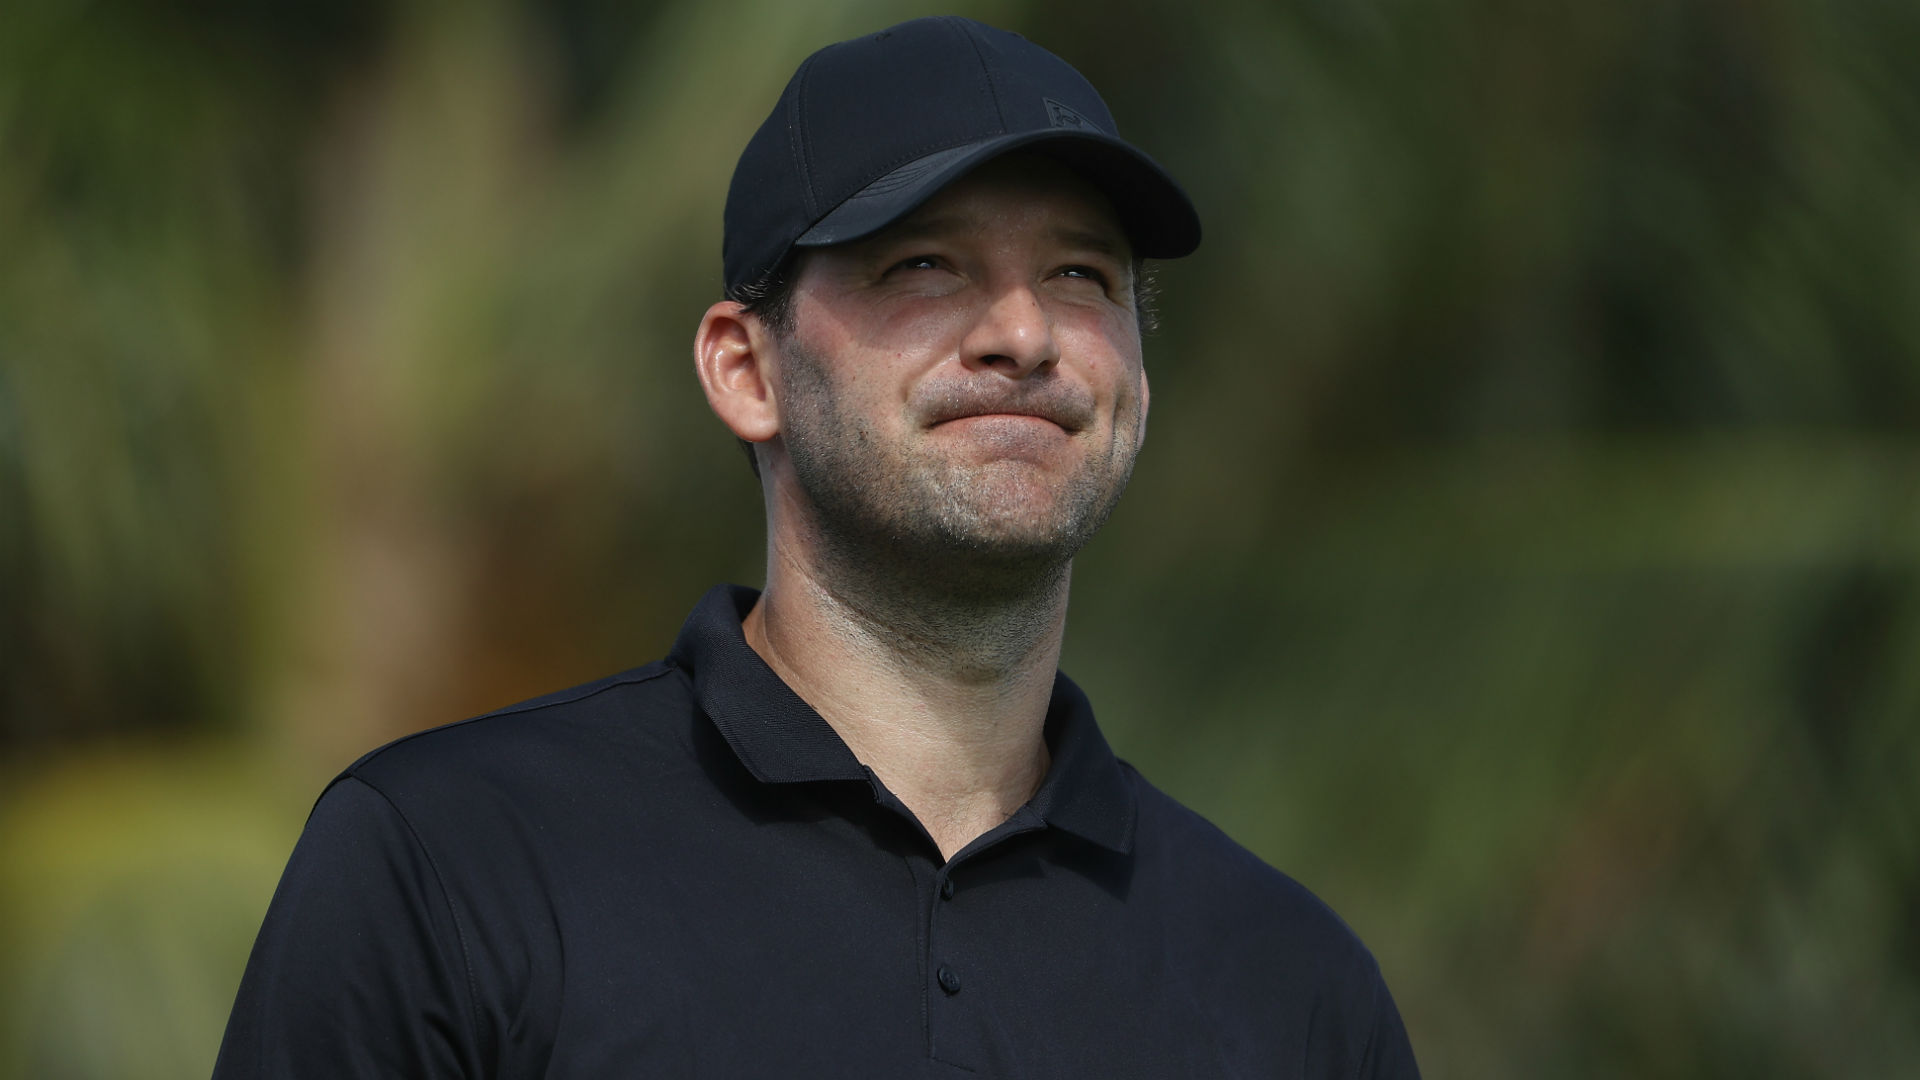 Tony Romo has competed in in a number of U.S. Open qualifiers, and he will now try to earn his Web.com Tour card.